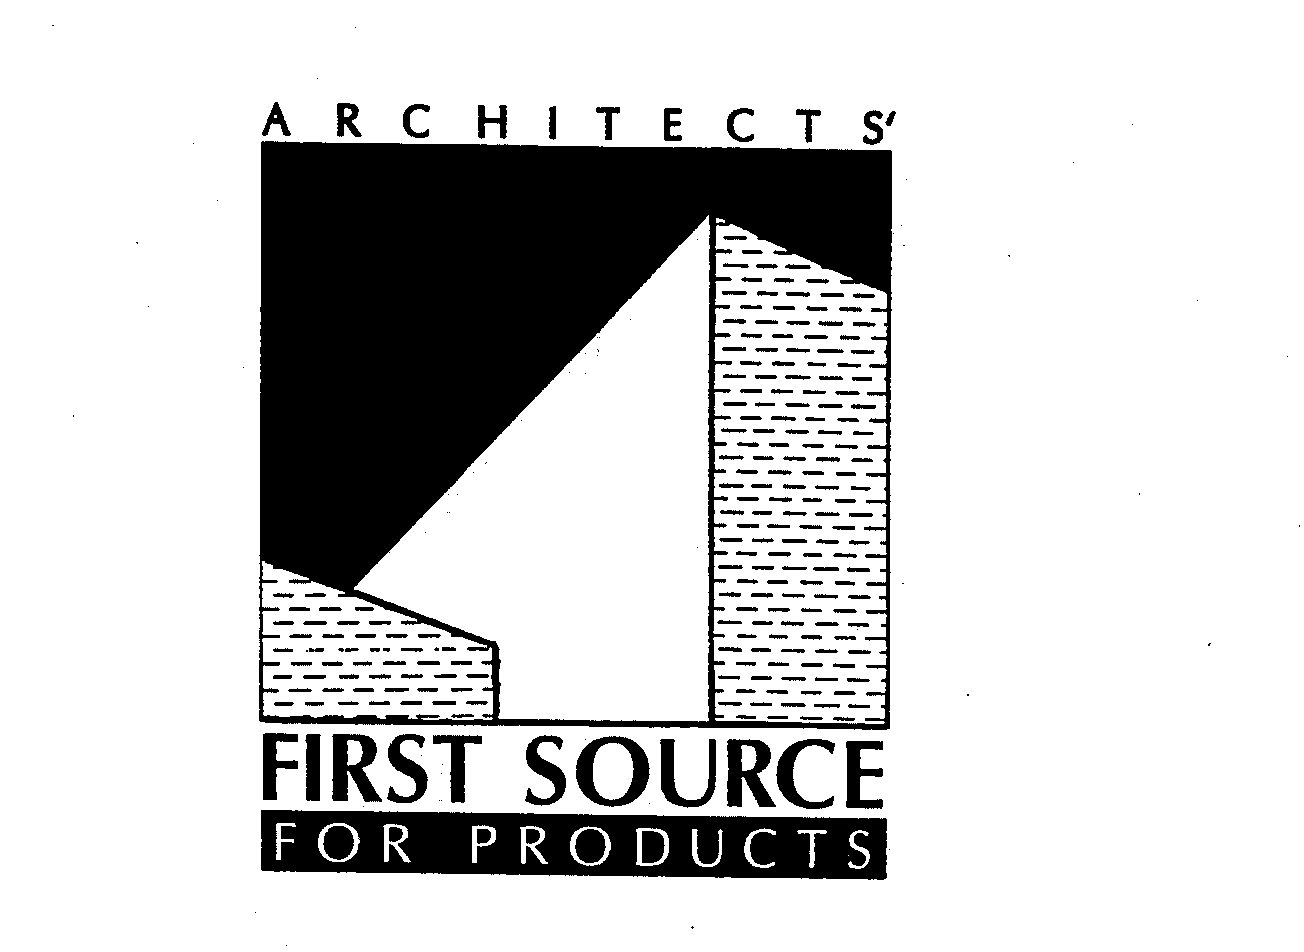  ARCHITECTS' FIRST SOURCE FOR PRODUCTS